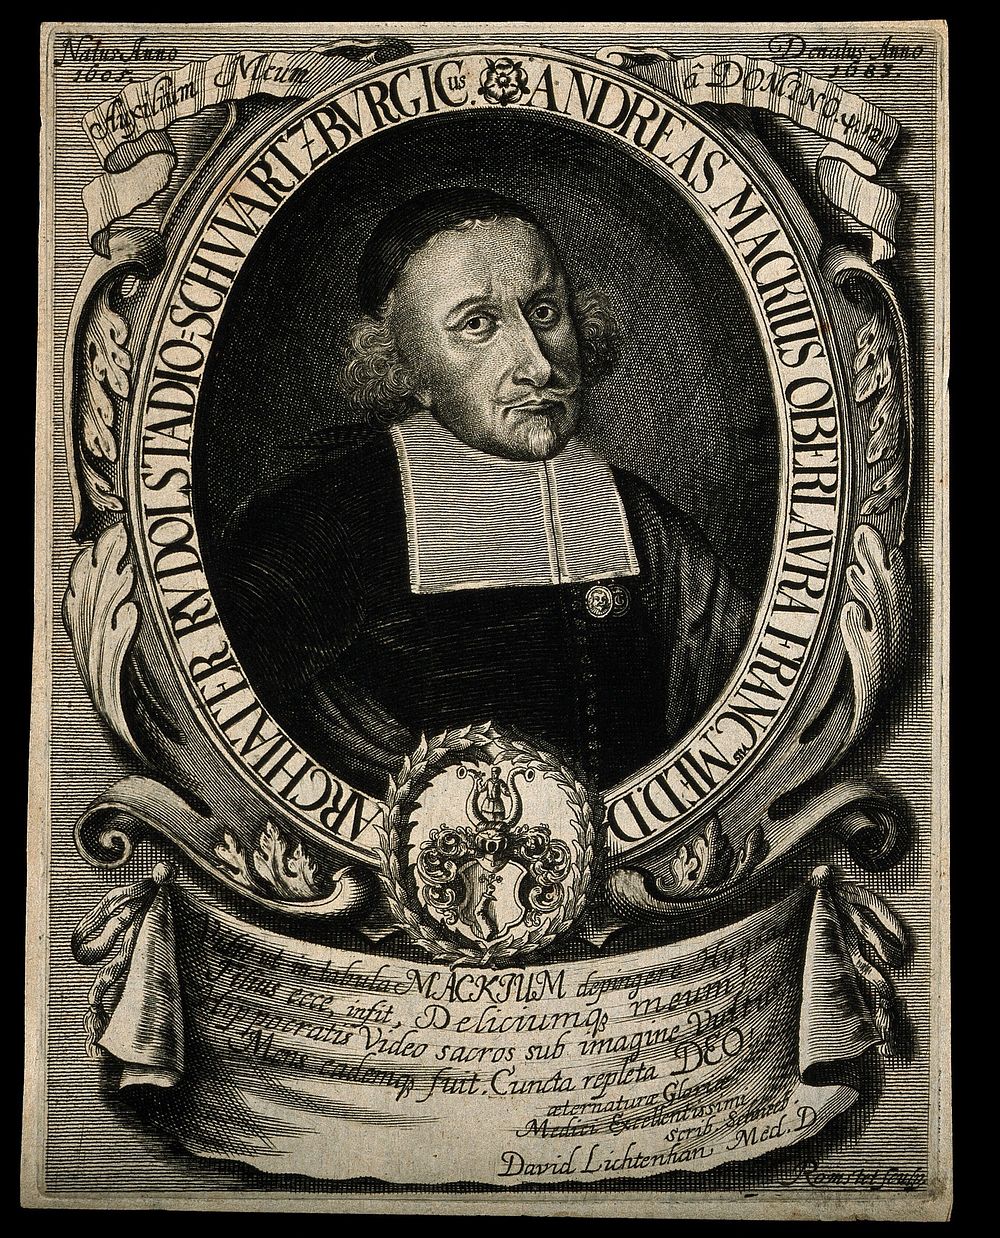 Andreas Mack. Line engraving by C. Romstet.